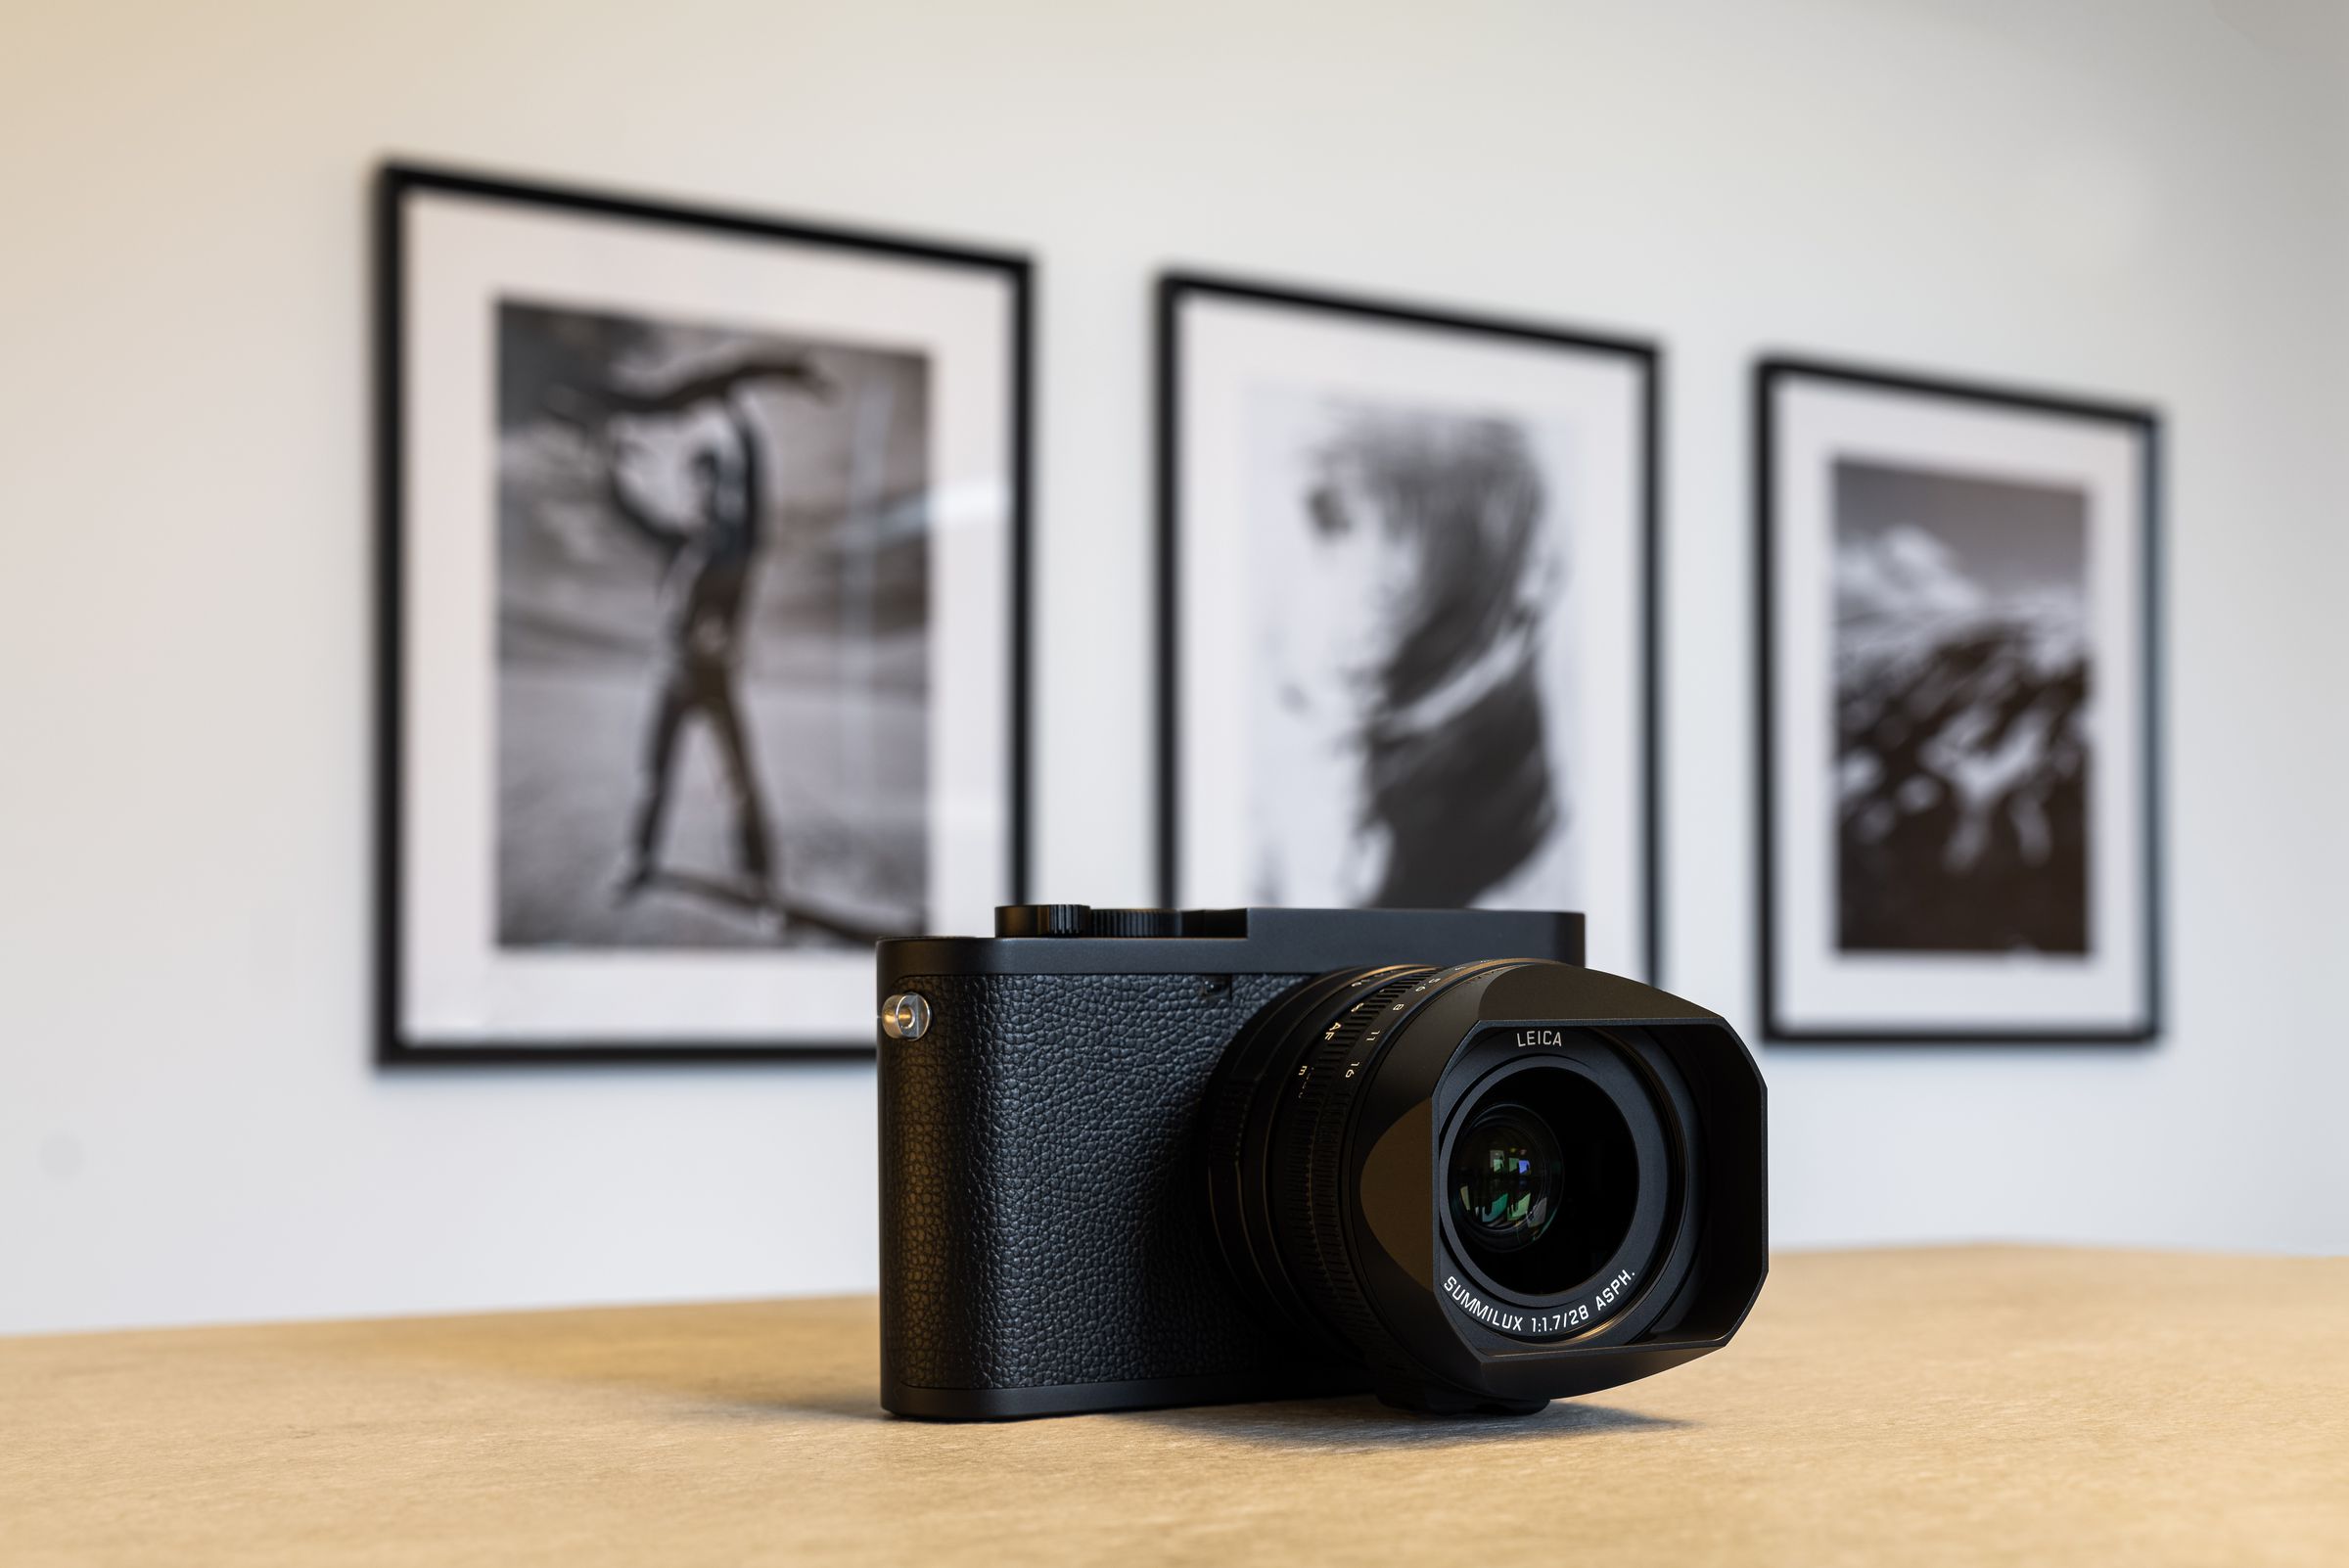 The Q2 Monochrom is the first autofocus camera to get the Monochrom treatment